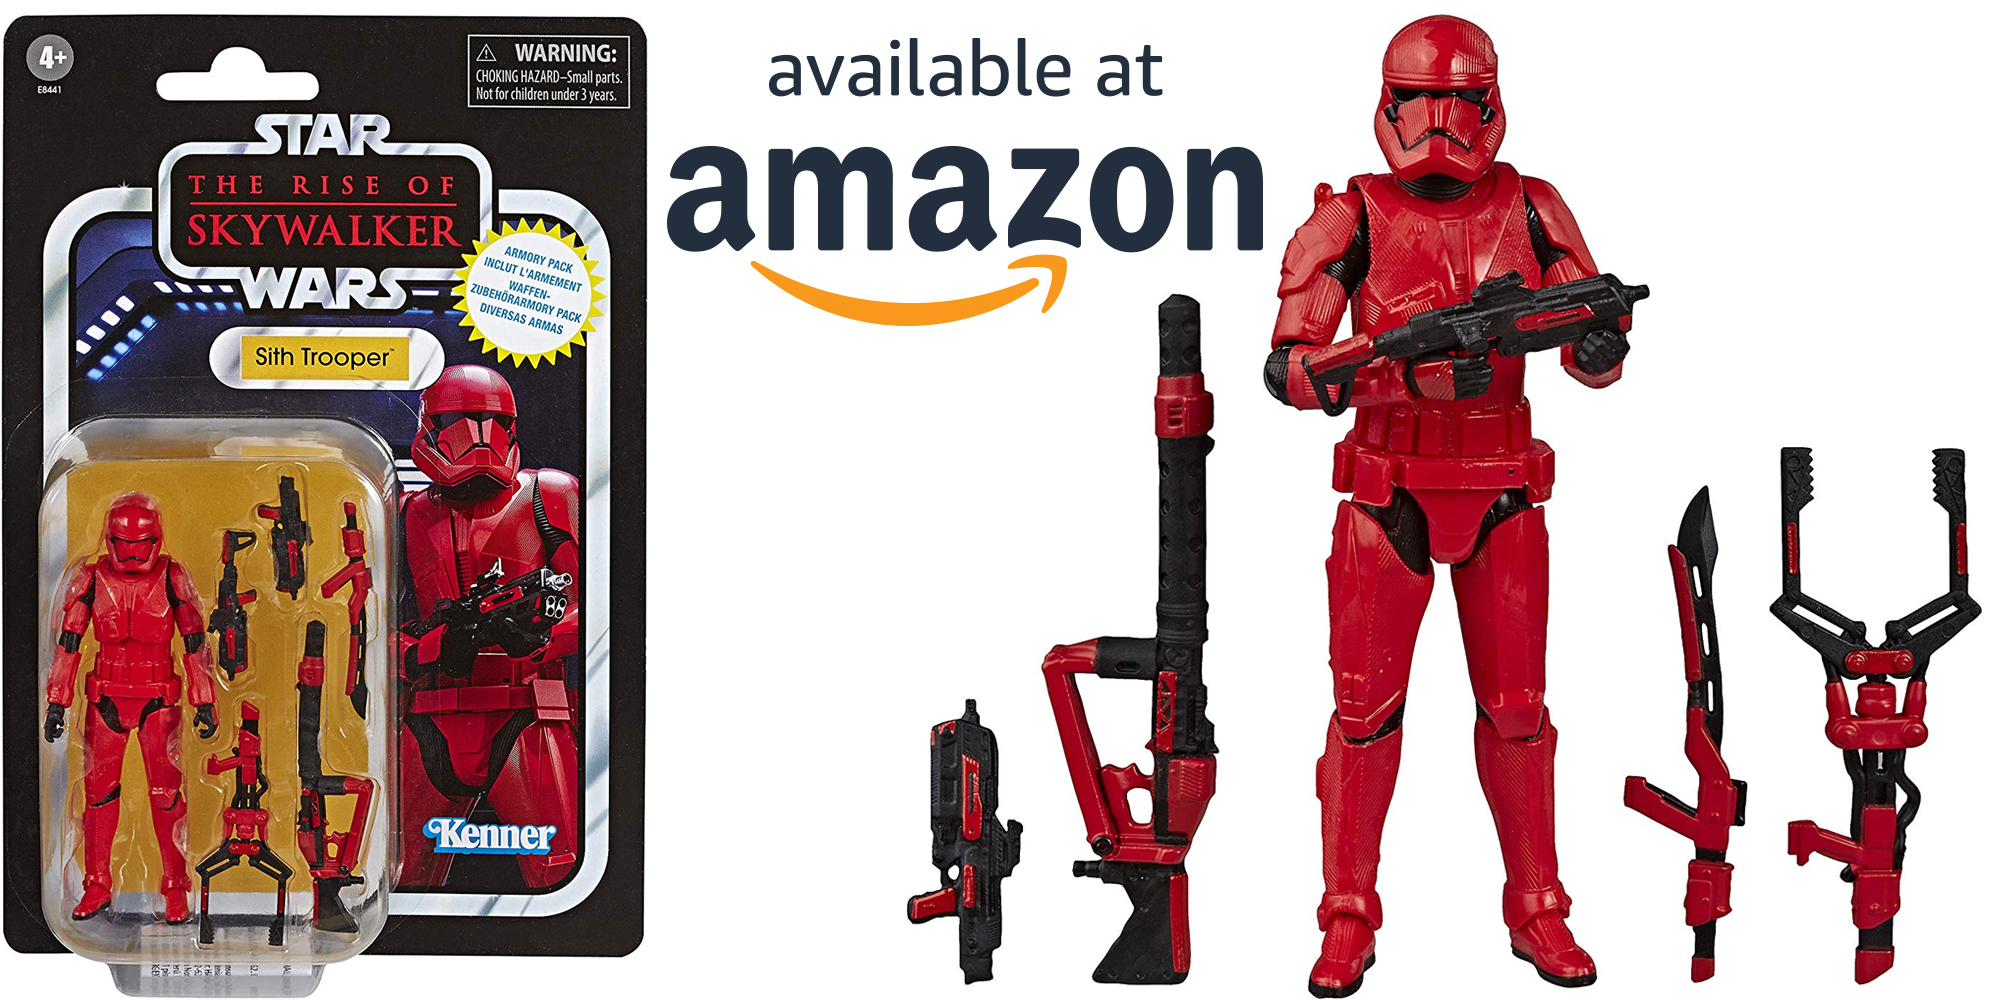 The Amazon Exclusive Vintage Collection Sith Trooper